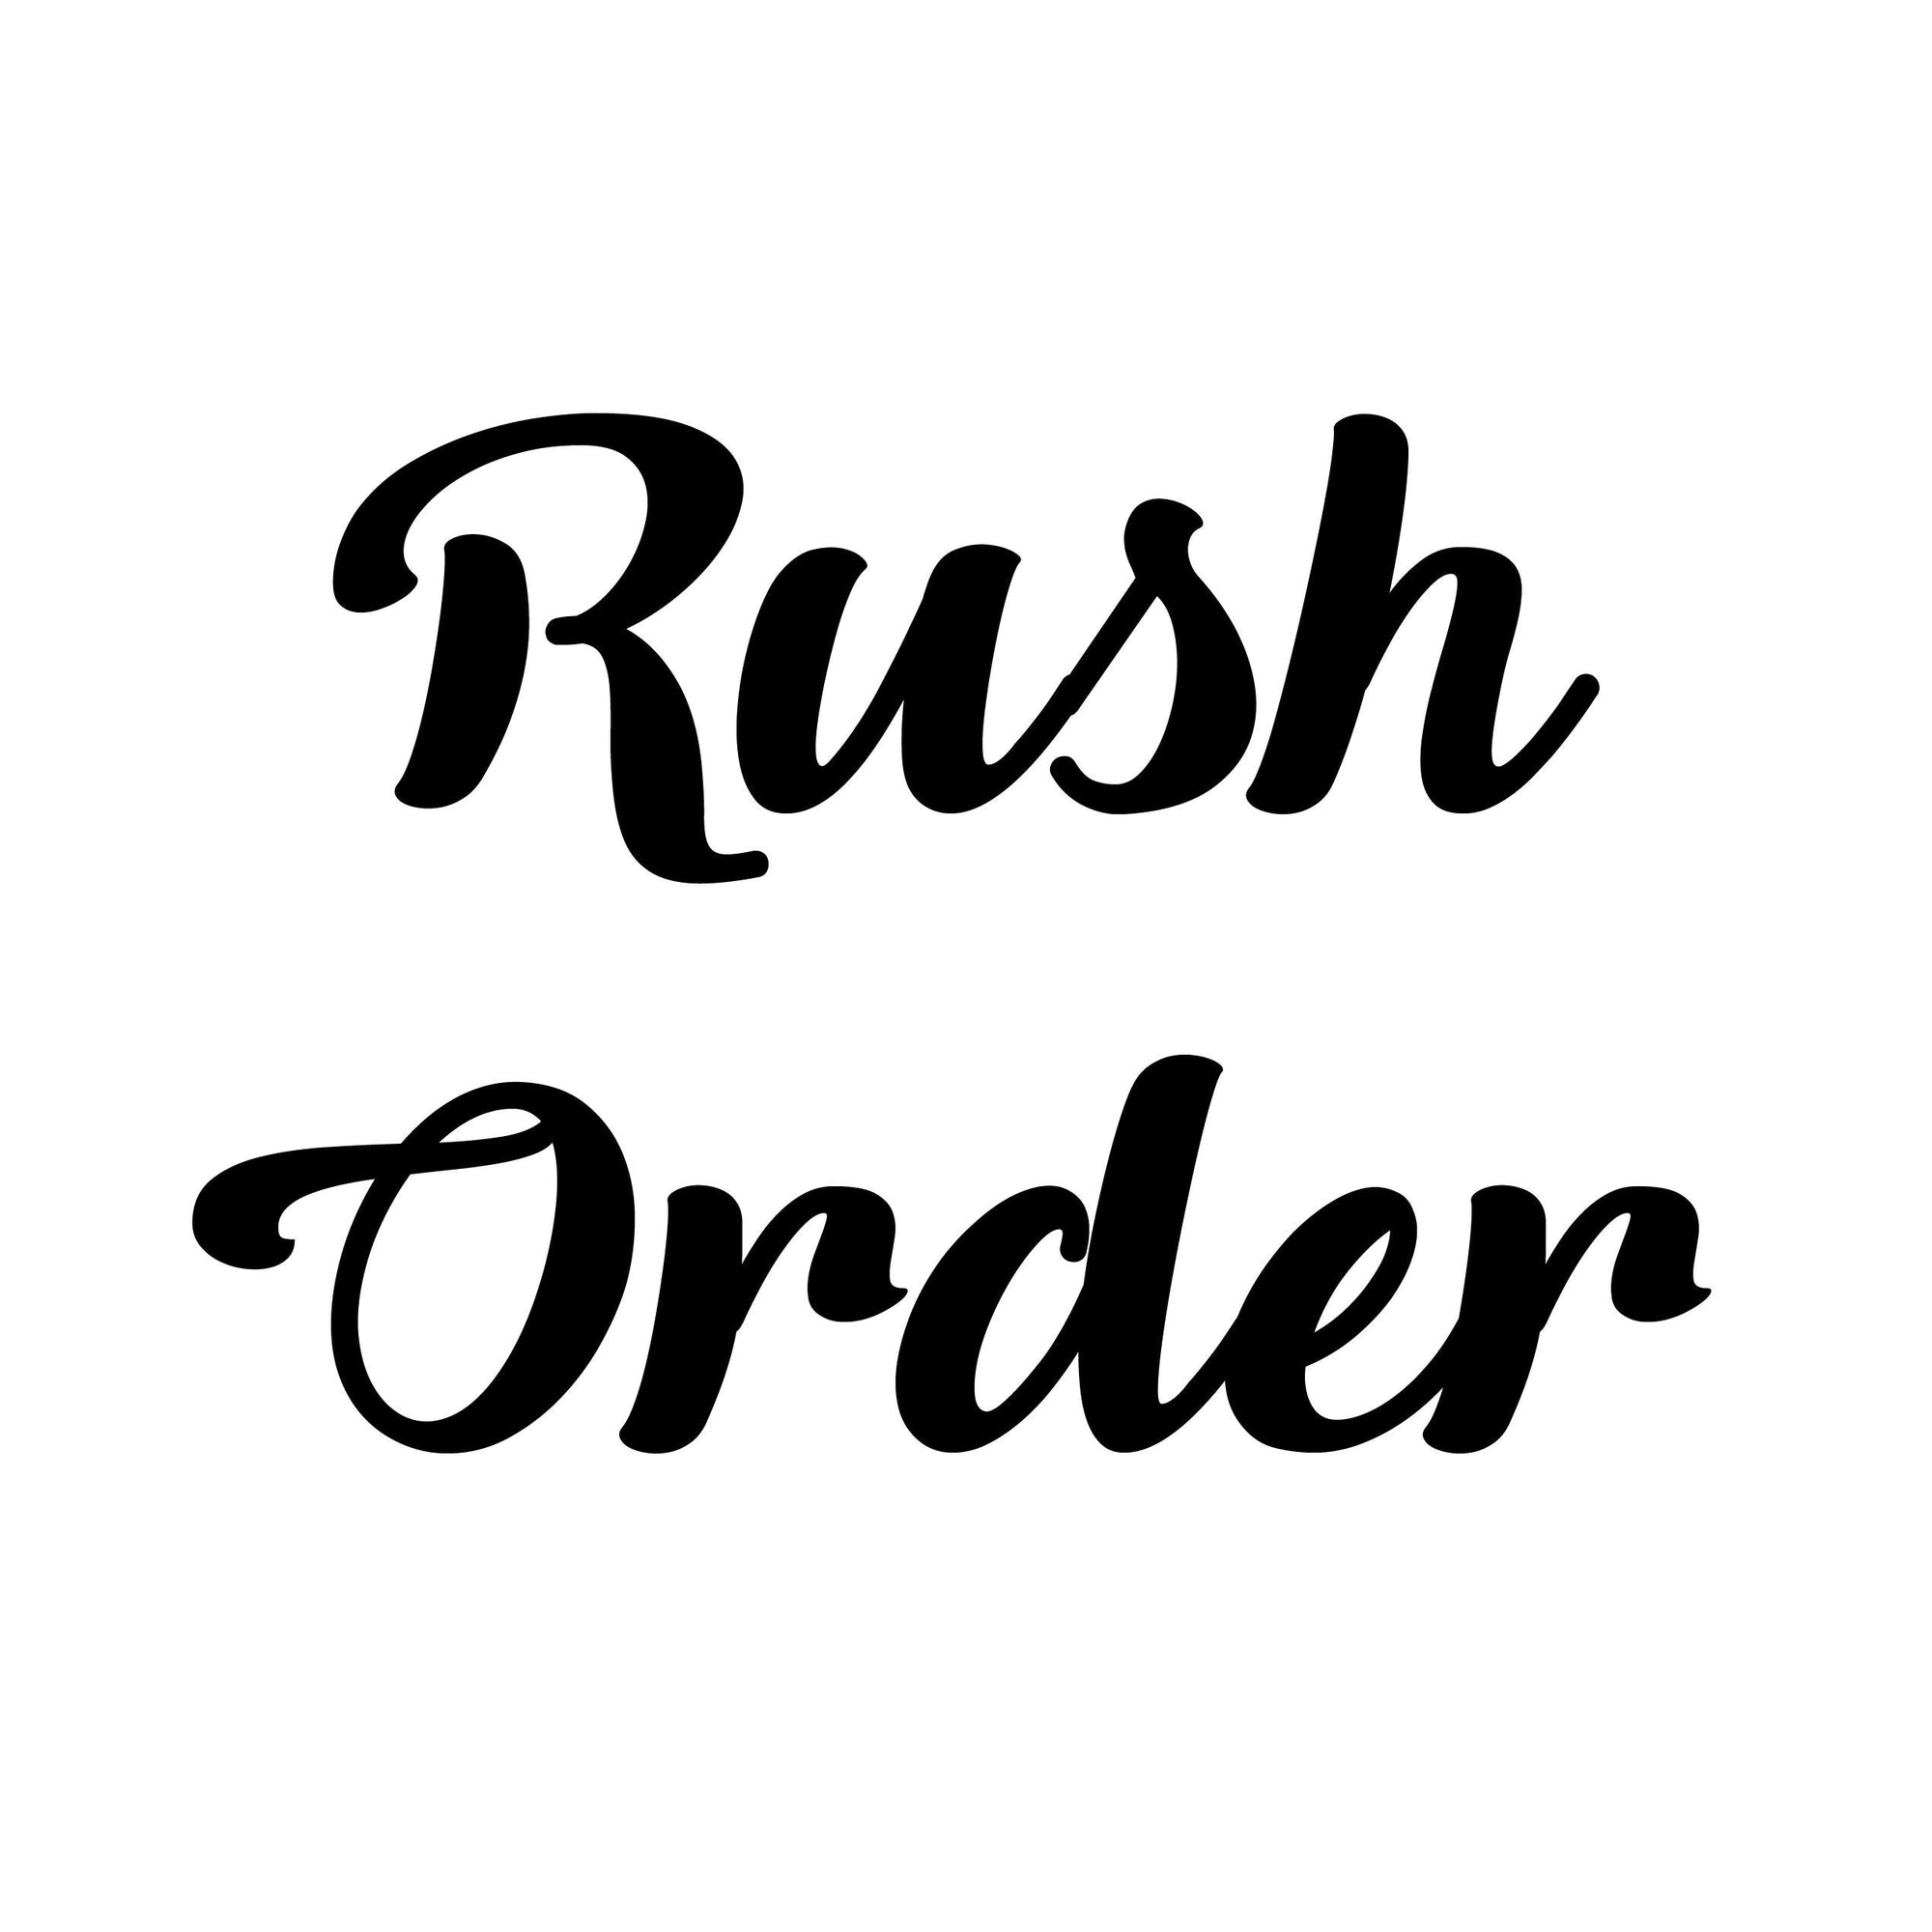 DECEMBER RUSH ORDER - 24 hour processing (Monday to Friday) - Please contact us prior to purchasing